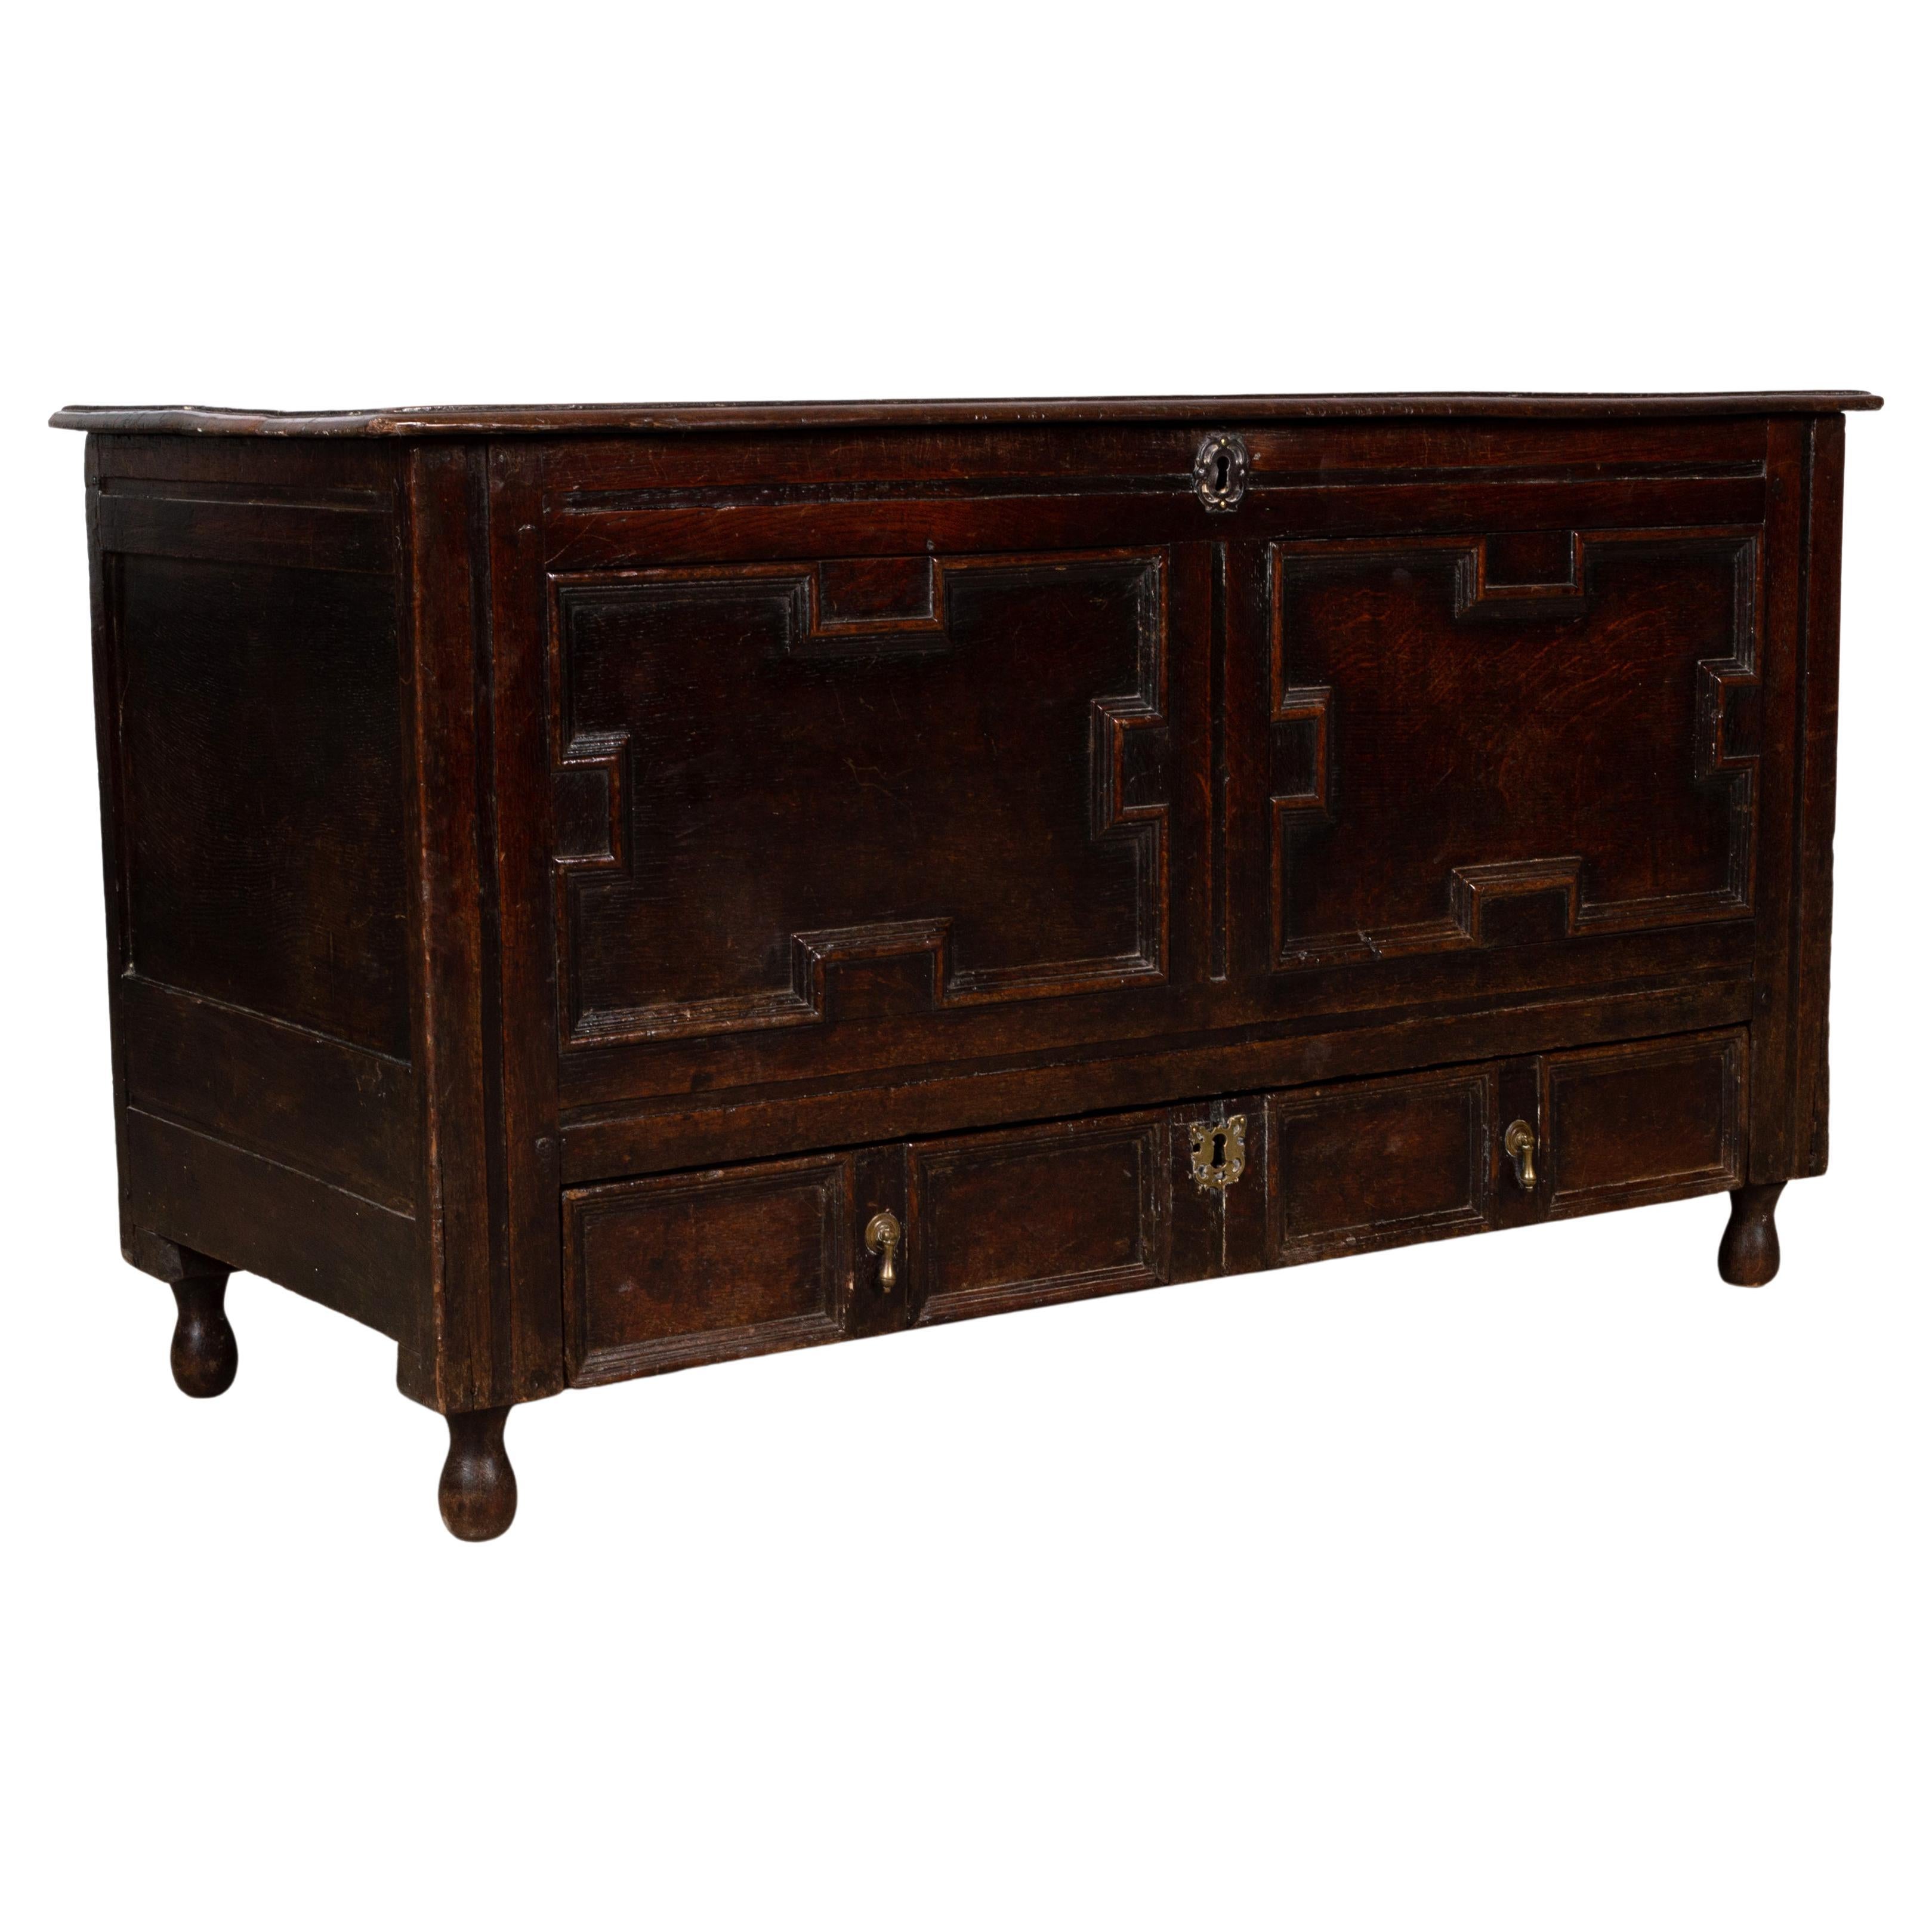 A Jacobean oak mule chest

Antique English 17th century Jacobean Oak Mule Chest circa 1660

A Charles II Jacobean oak mule chest
17th century, geometric moulded panel front, long drawer to base, on stile legs and later turned feet.

An